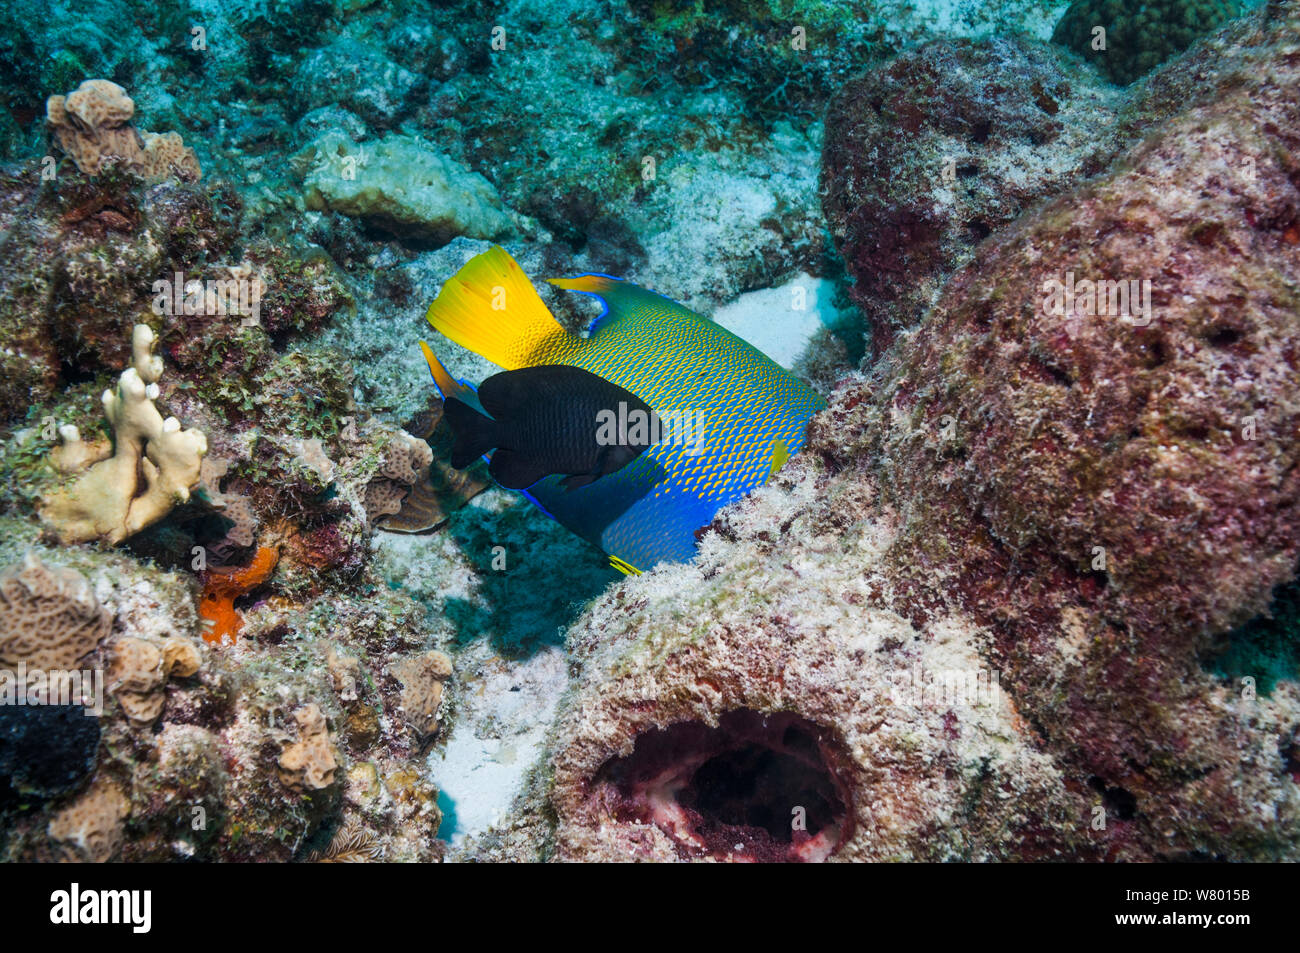 Queen angelfish (Holocanthus ciliaris) feeding on sponge, whilst a Dusky damselfish (Stegastes adustus), a very territorial fish, tries to chase it away.  Bonaire, Netherlands Antilles, Caribbean, Atlantic Ocean. Stock Photo